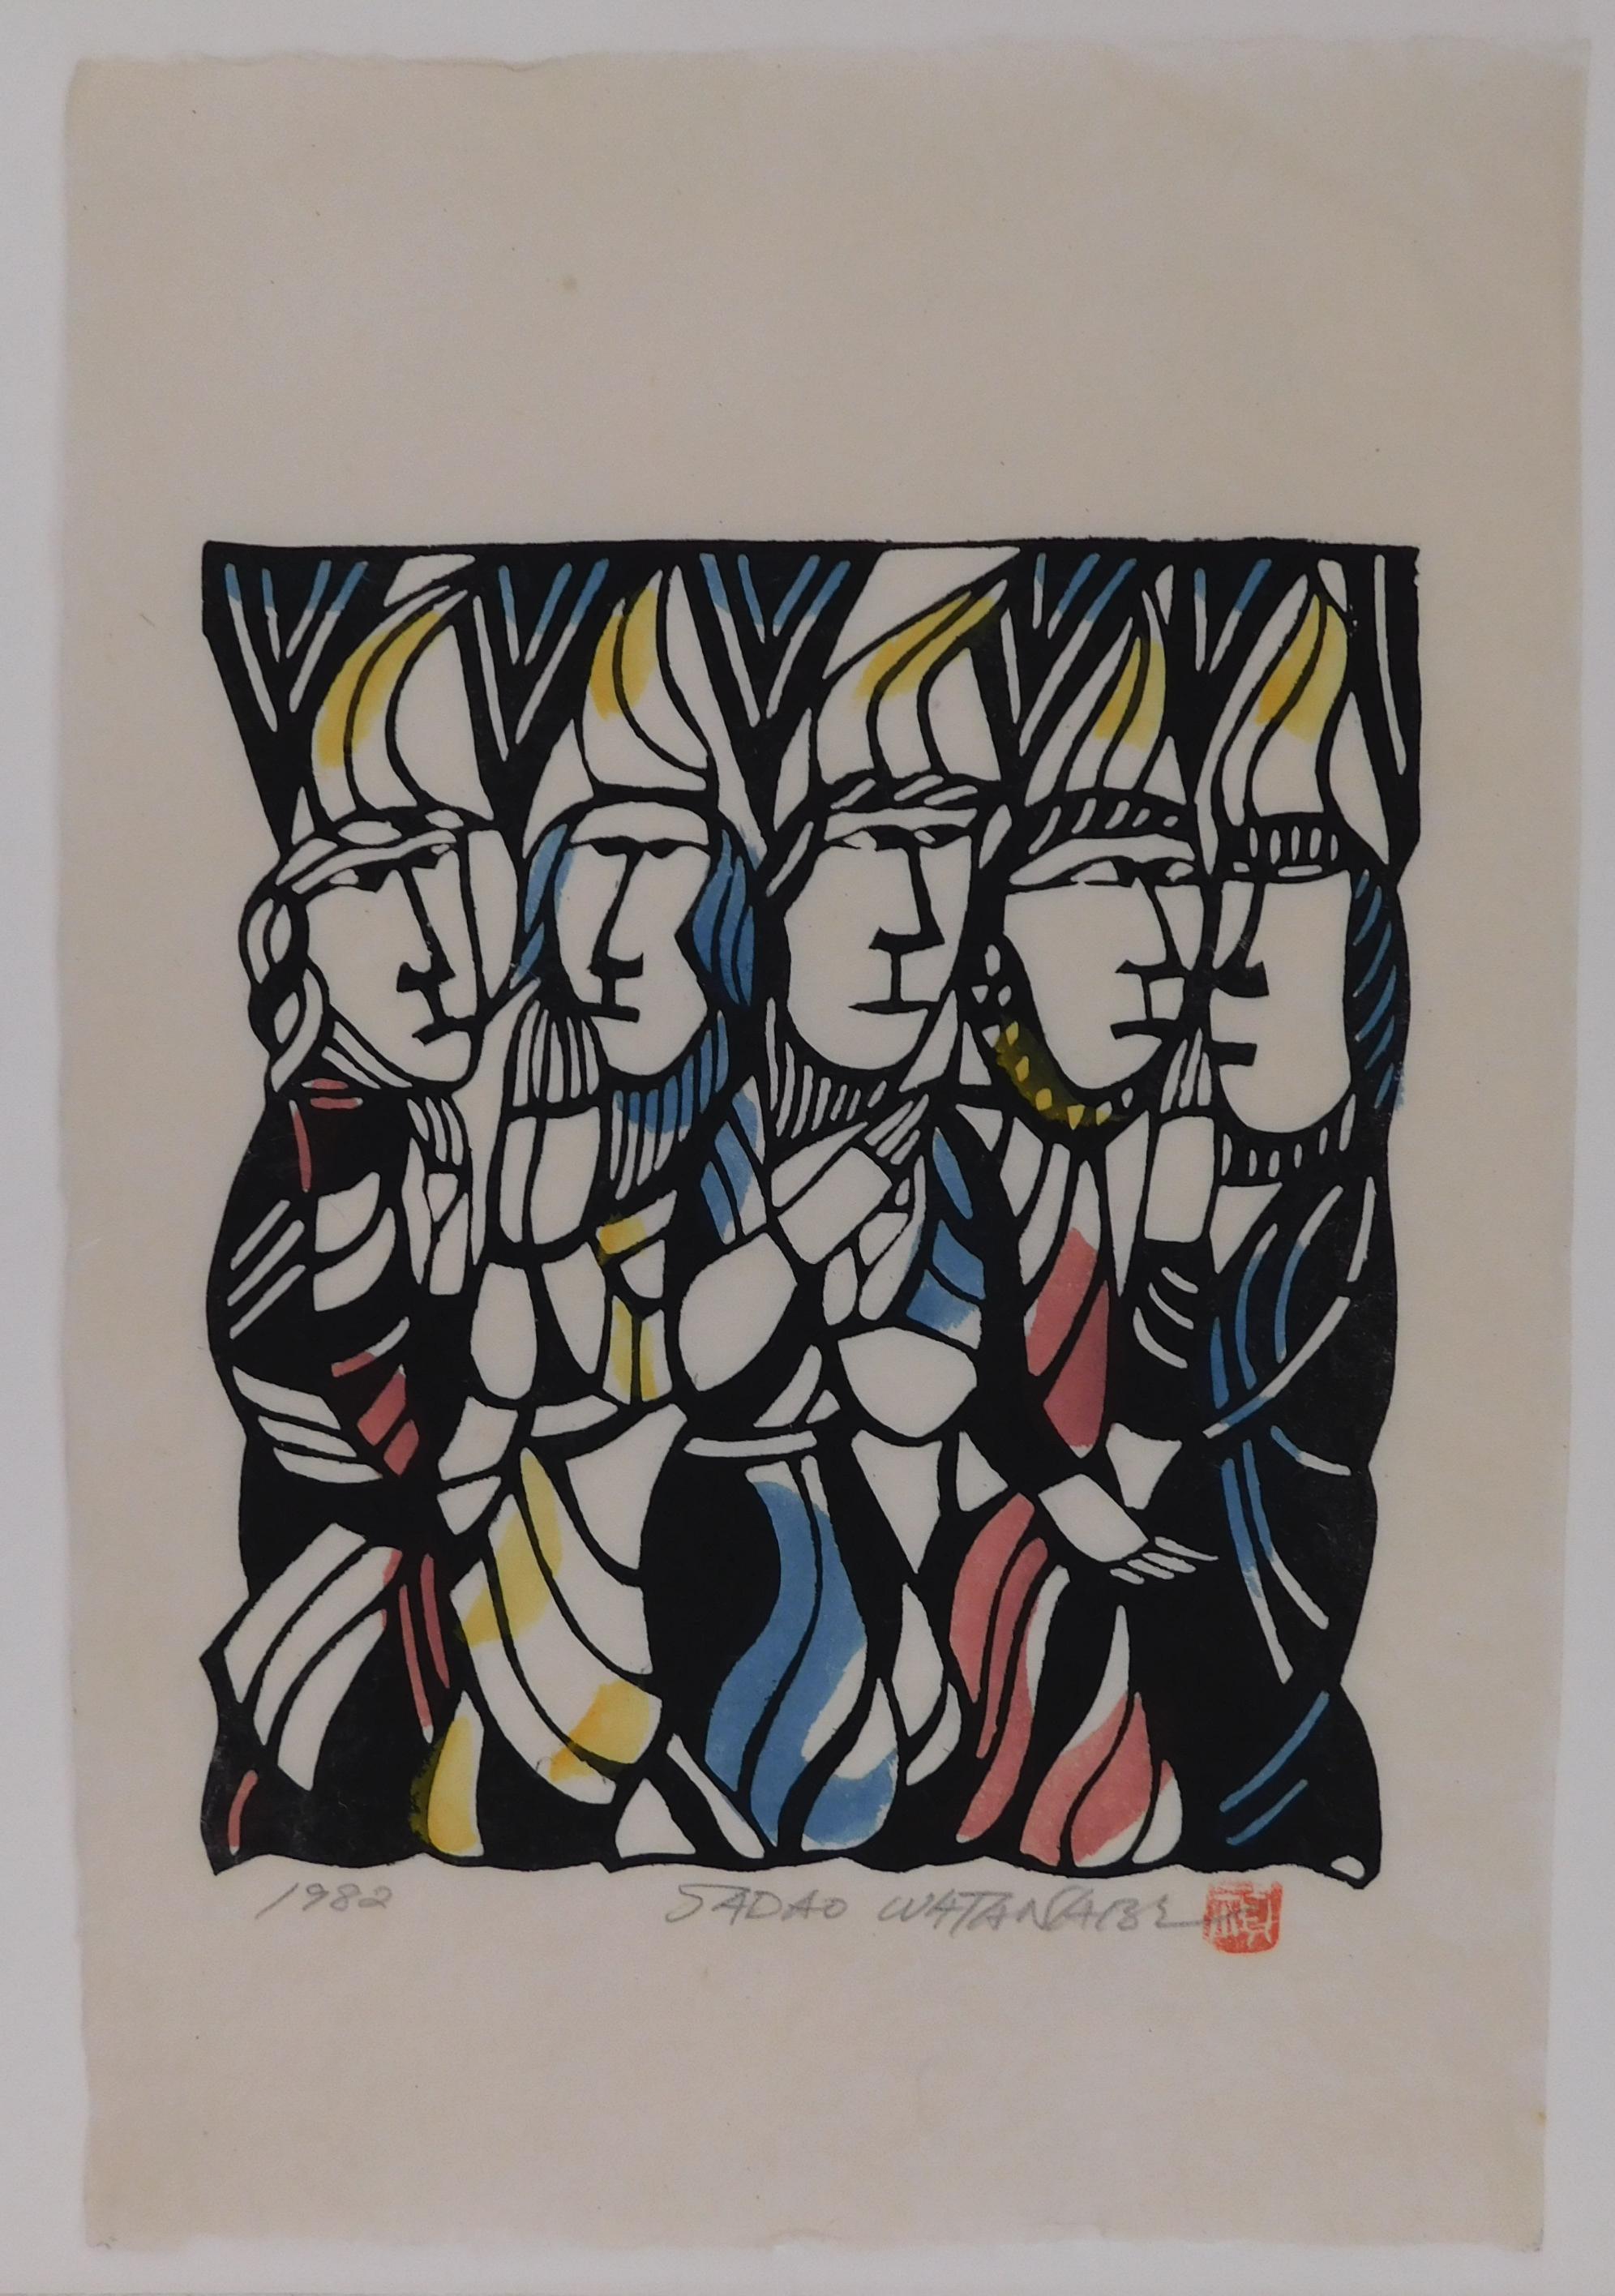 Stencil Print by Sadao Watanabe, hand colored on hand-made washi paper.
This image depicts the flames of fire seen on the day of Pentecost from the book of Acts.
Artist’s chop mark and pencil signature are seen lower right. Dated (1982) lower